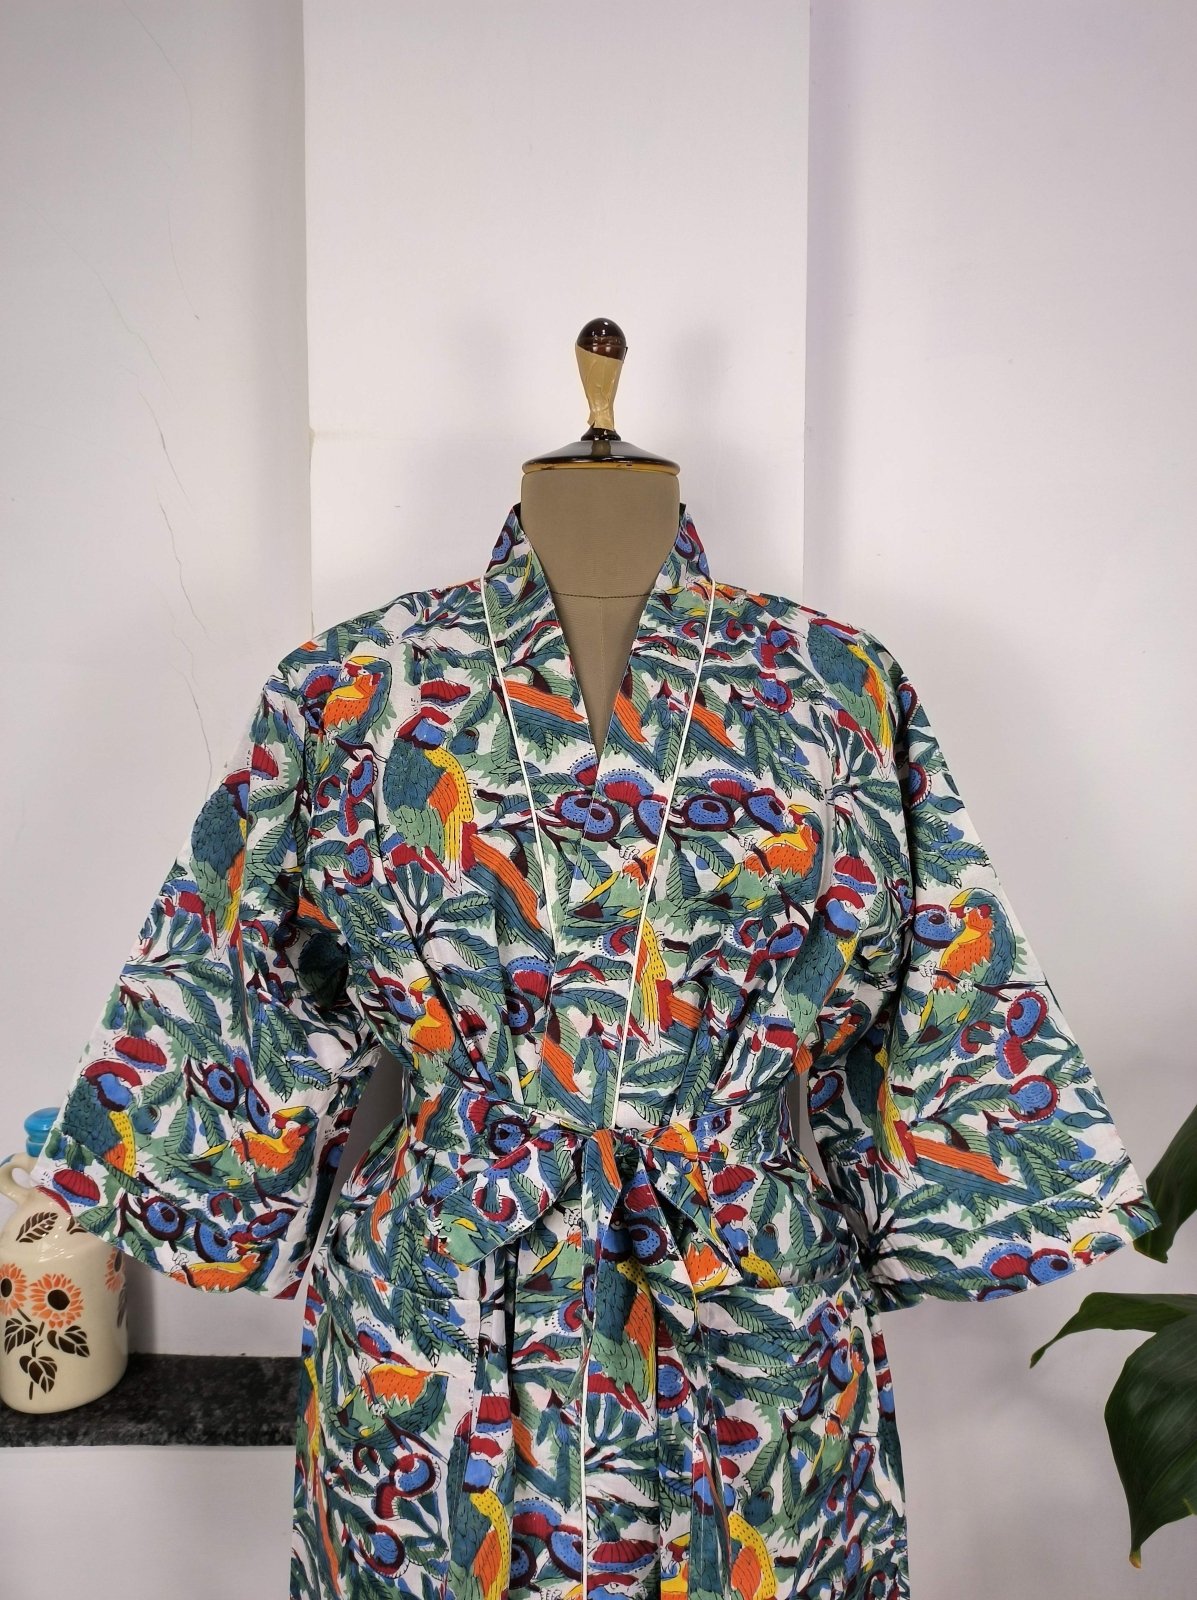 Boho House Robe Indian Handprinted Cotton Kimono Parrot Bird Print | Perfect for Summer Luxury Beach Holidays Yacht Cover Up Stunning Dress - The Eastern Loom